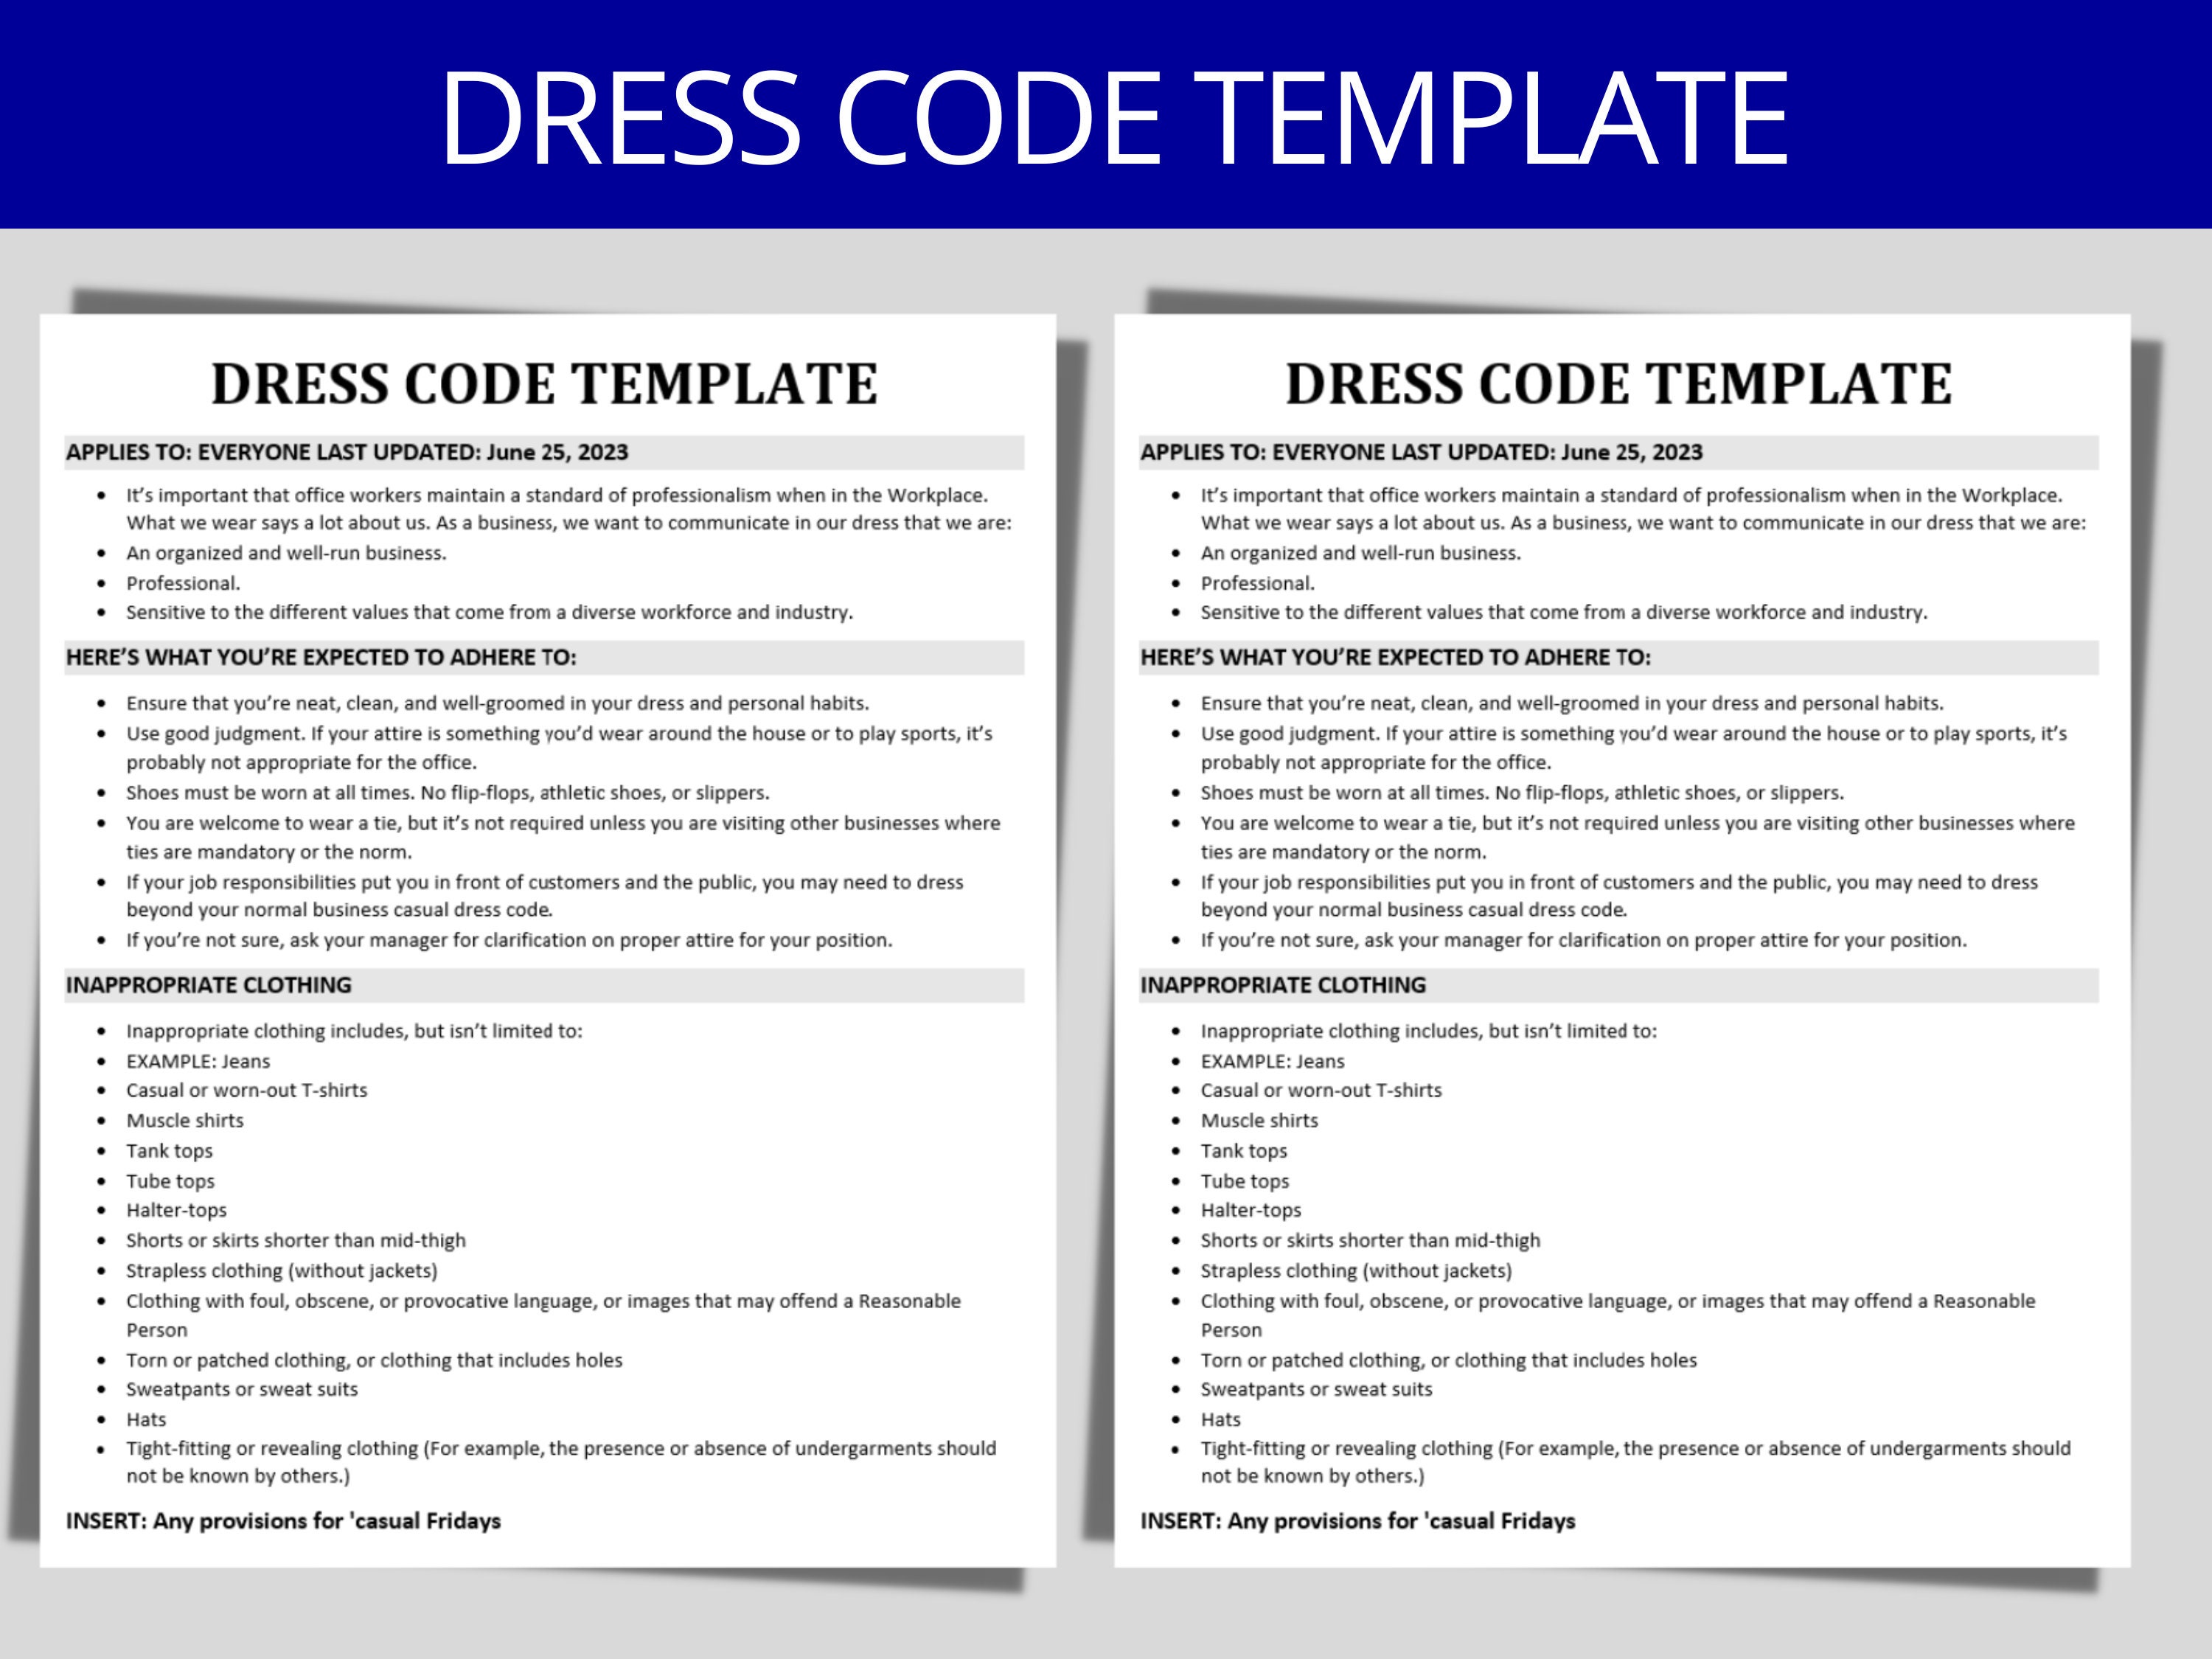 dress code policy